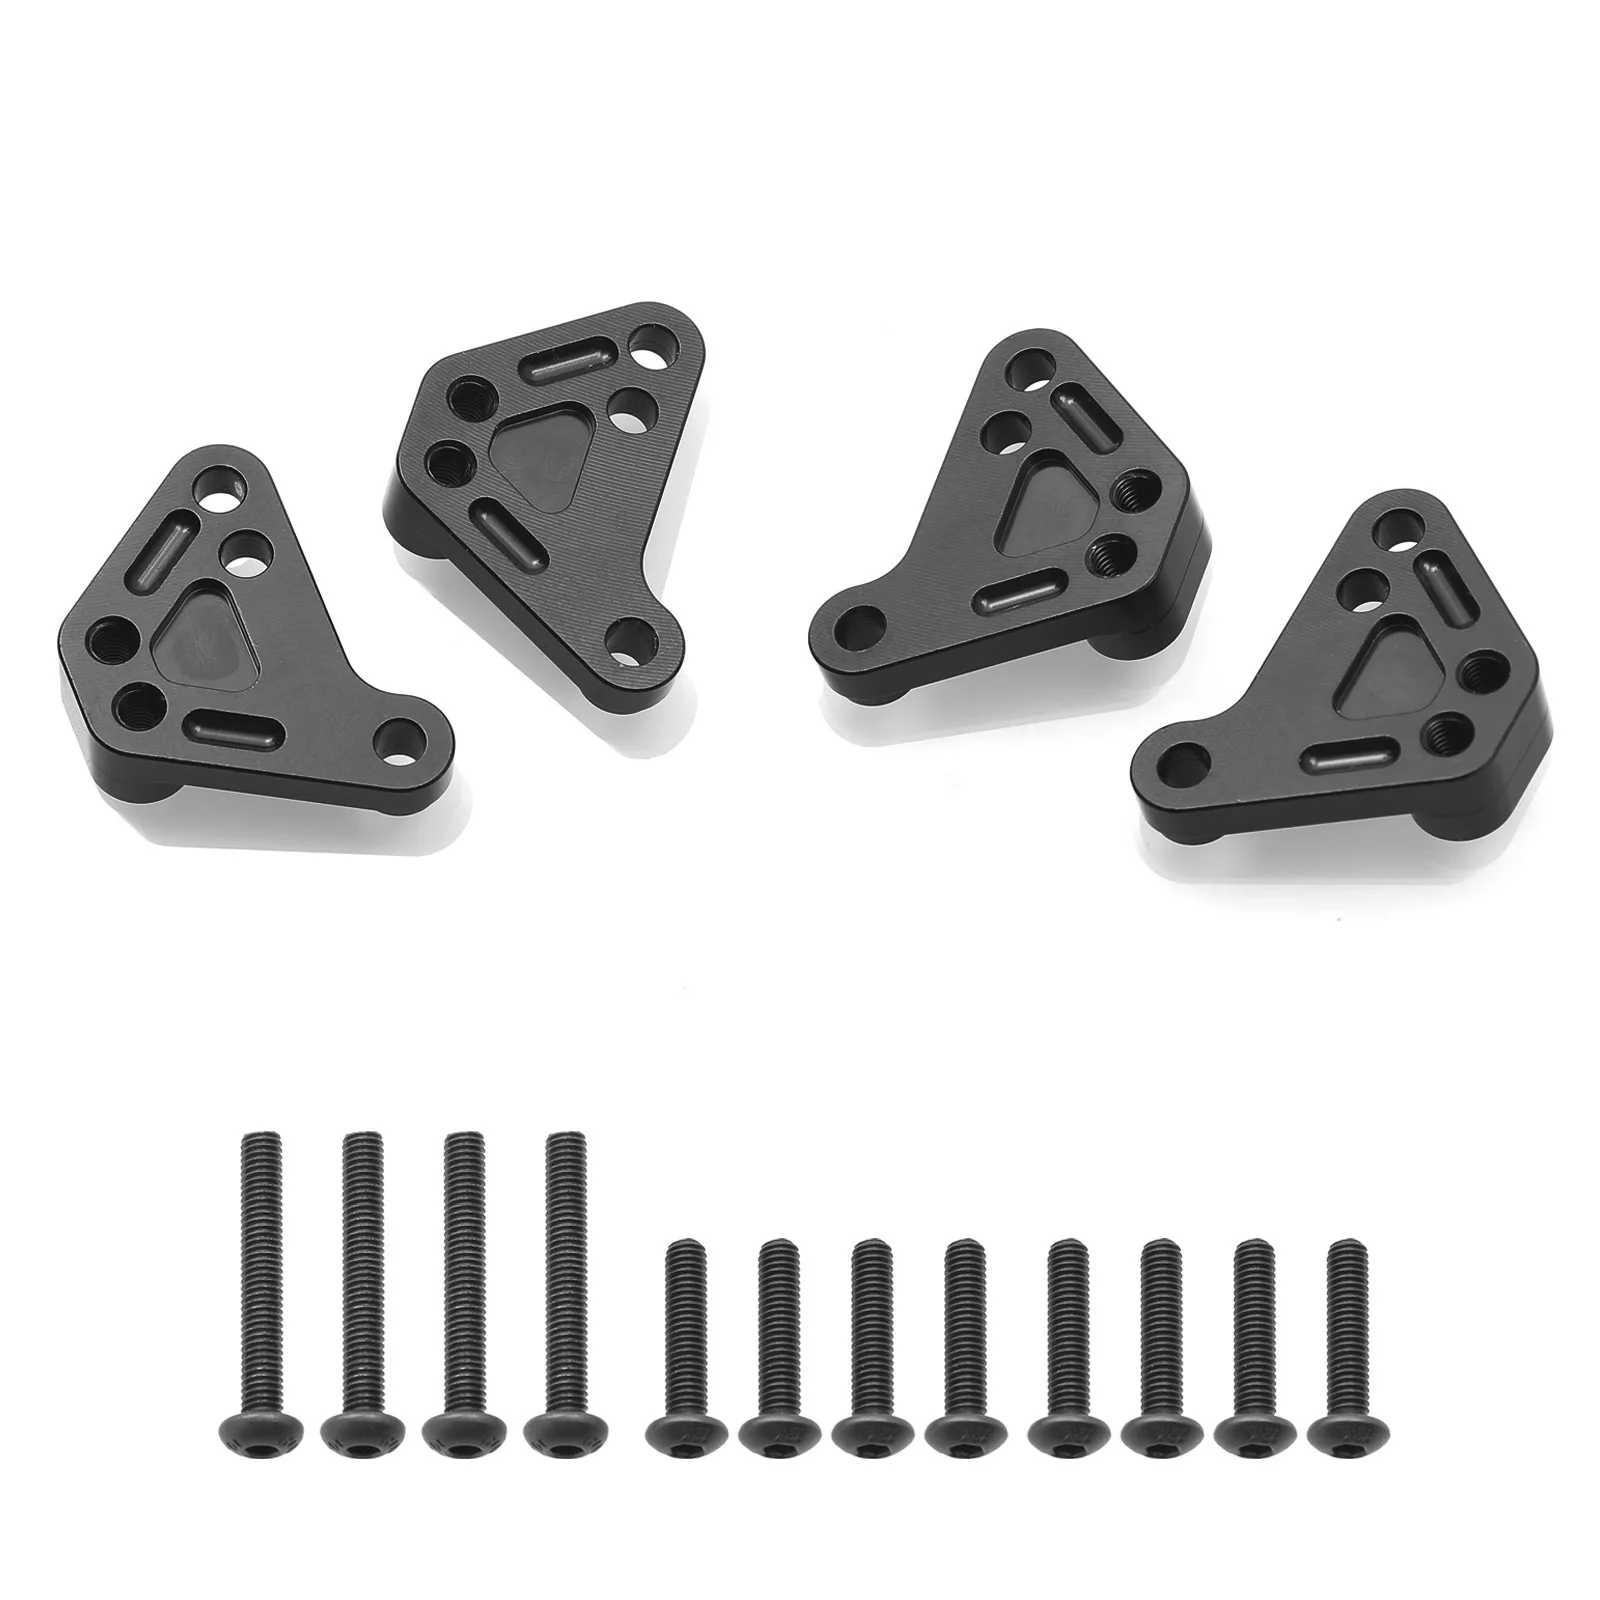 

4pc Metal Heighten Front and Rear Shock Absorber Lower Mount Bracket for 1/10 Traxxas MAXX 2.0 V2 89076-4 WideMaxx Upgrade Parts